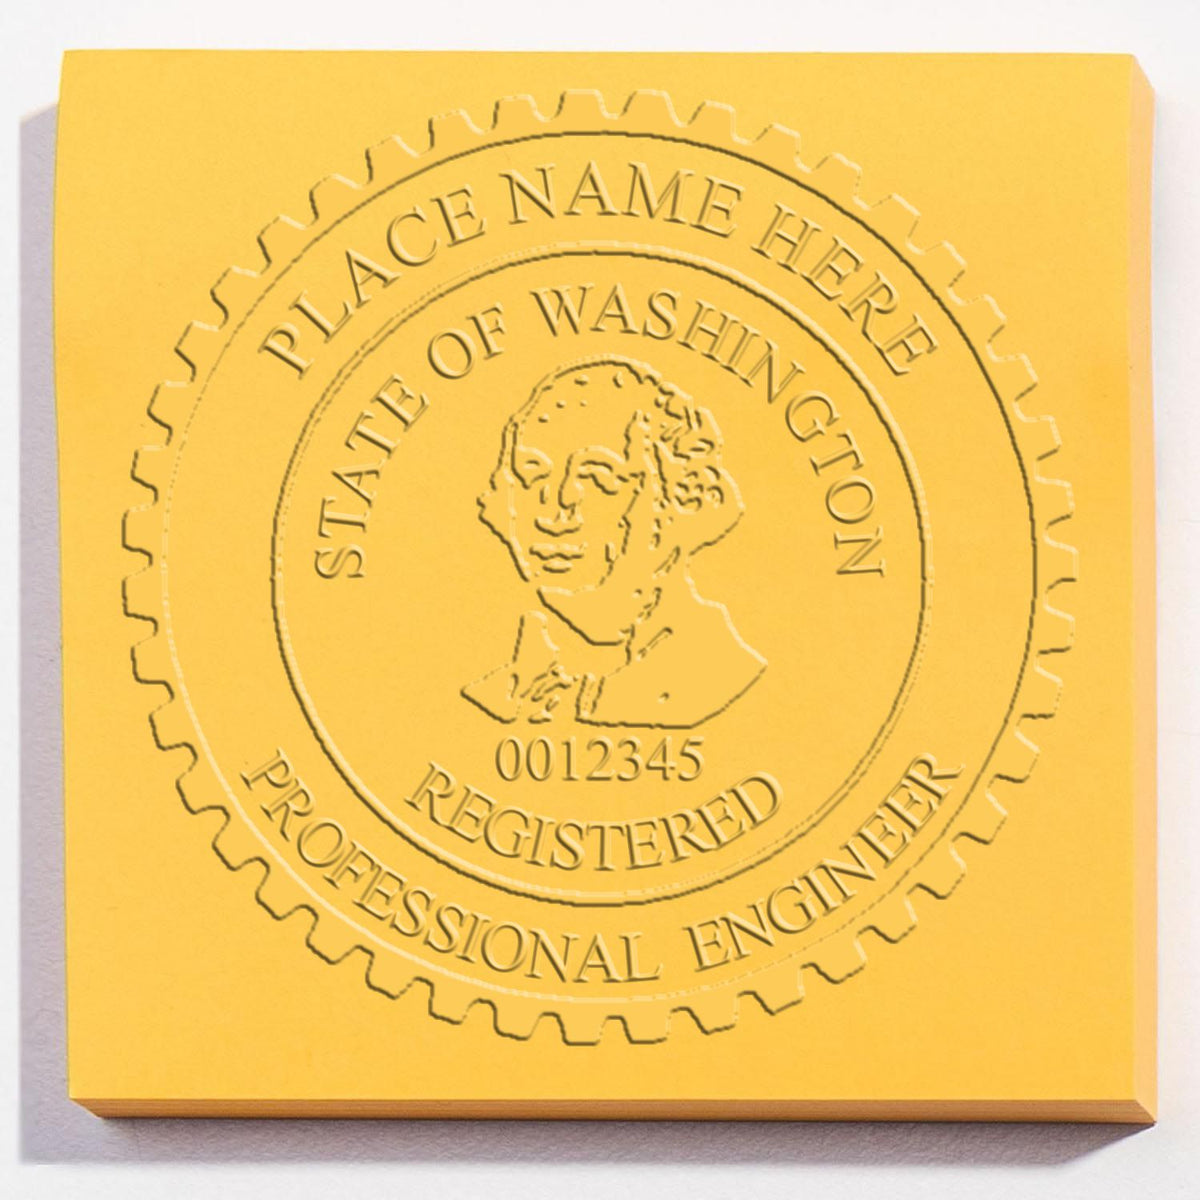 An alternative view of the Heavy Duty Cast Iron Washington Engineer Seal Embosser stamped on a sheet of paper showing the image in use